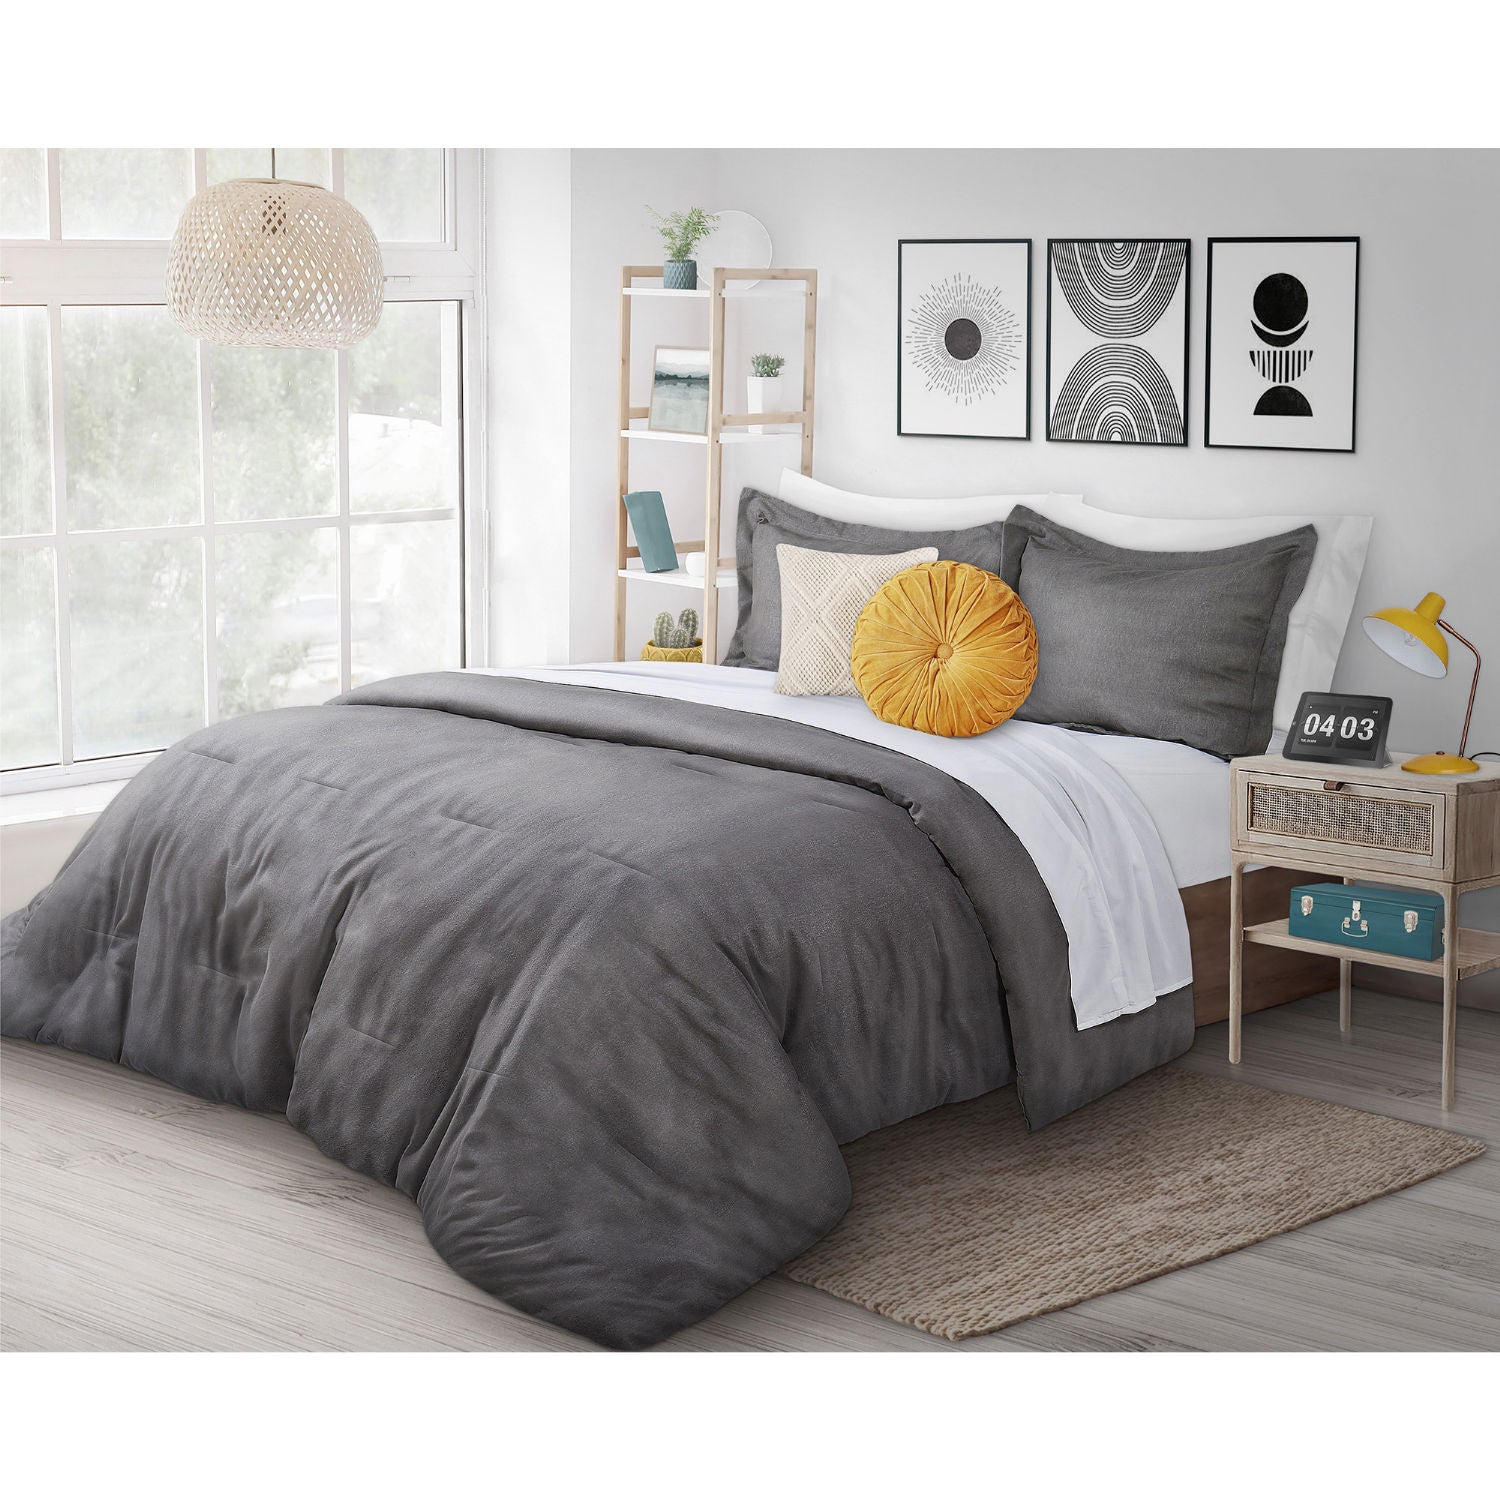 Woven Heathered Flannel Comforter 2 Pc Set Twin. Grey